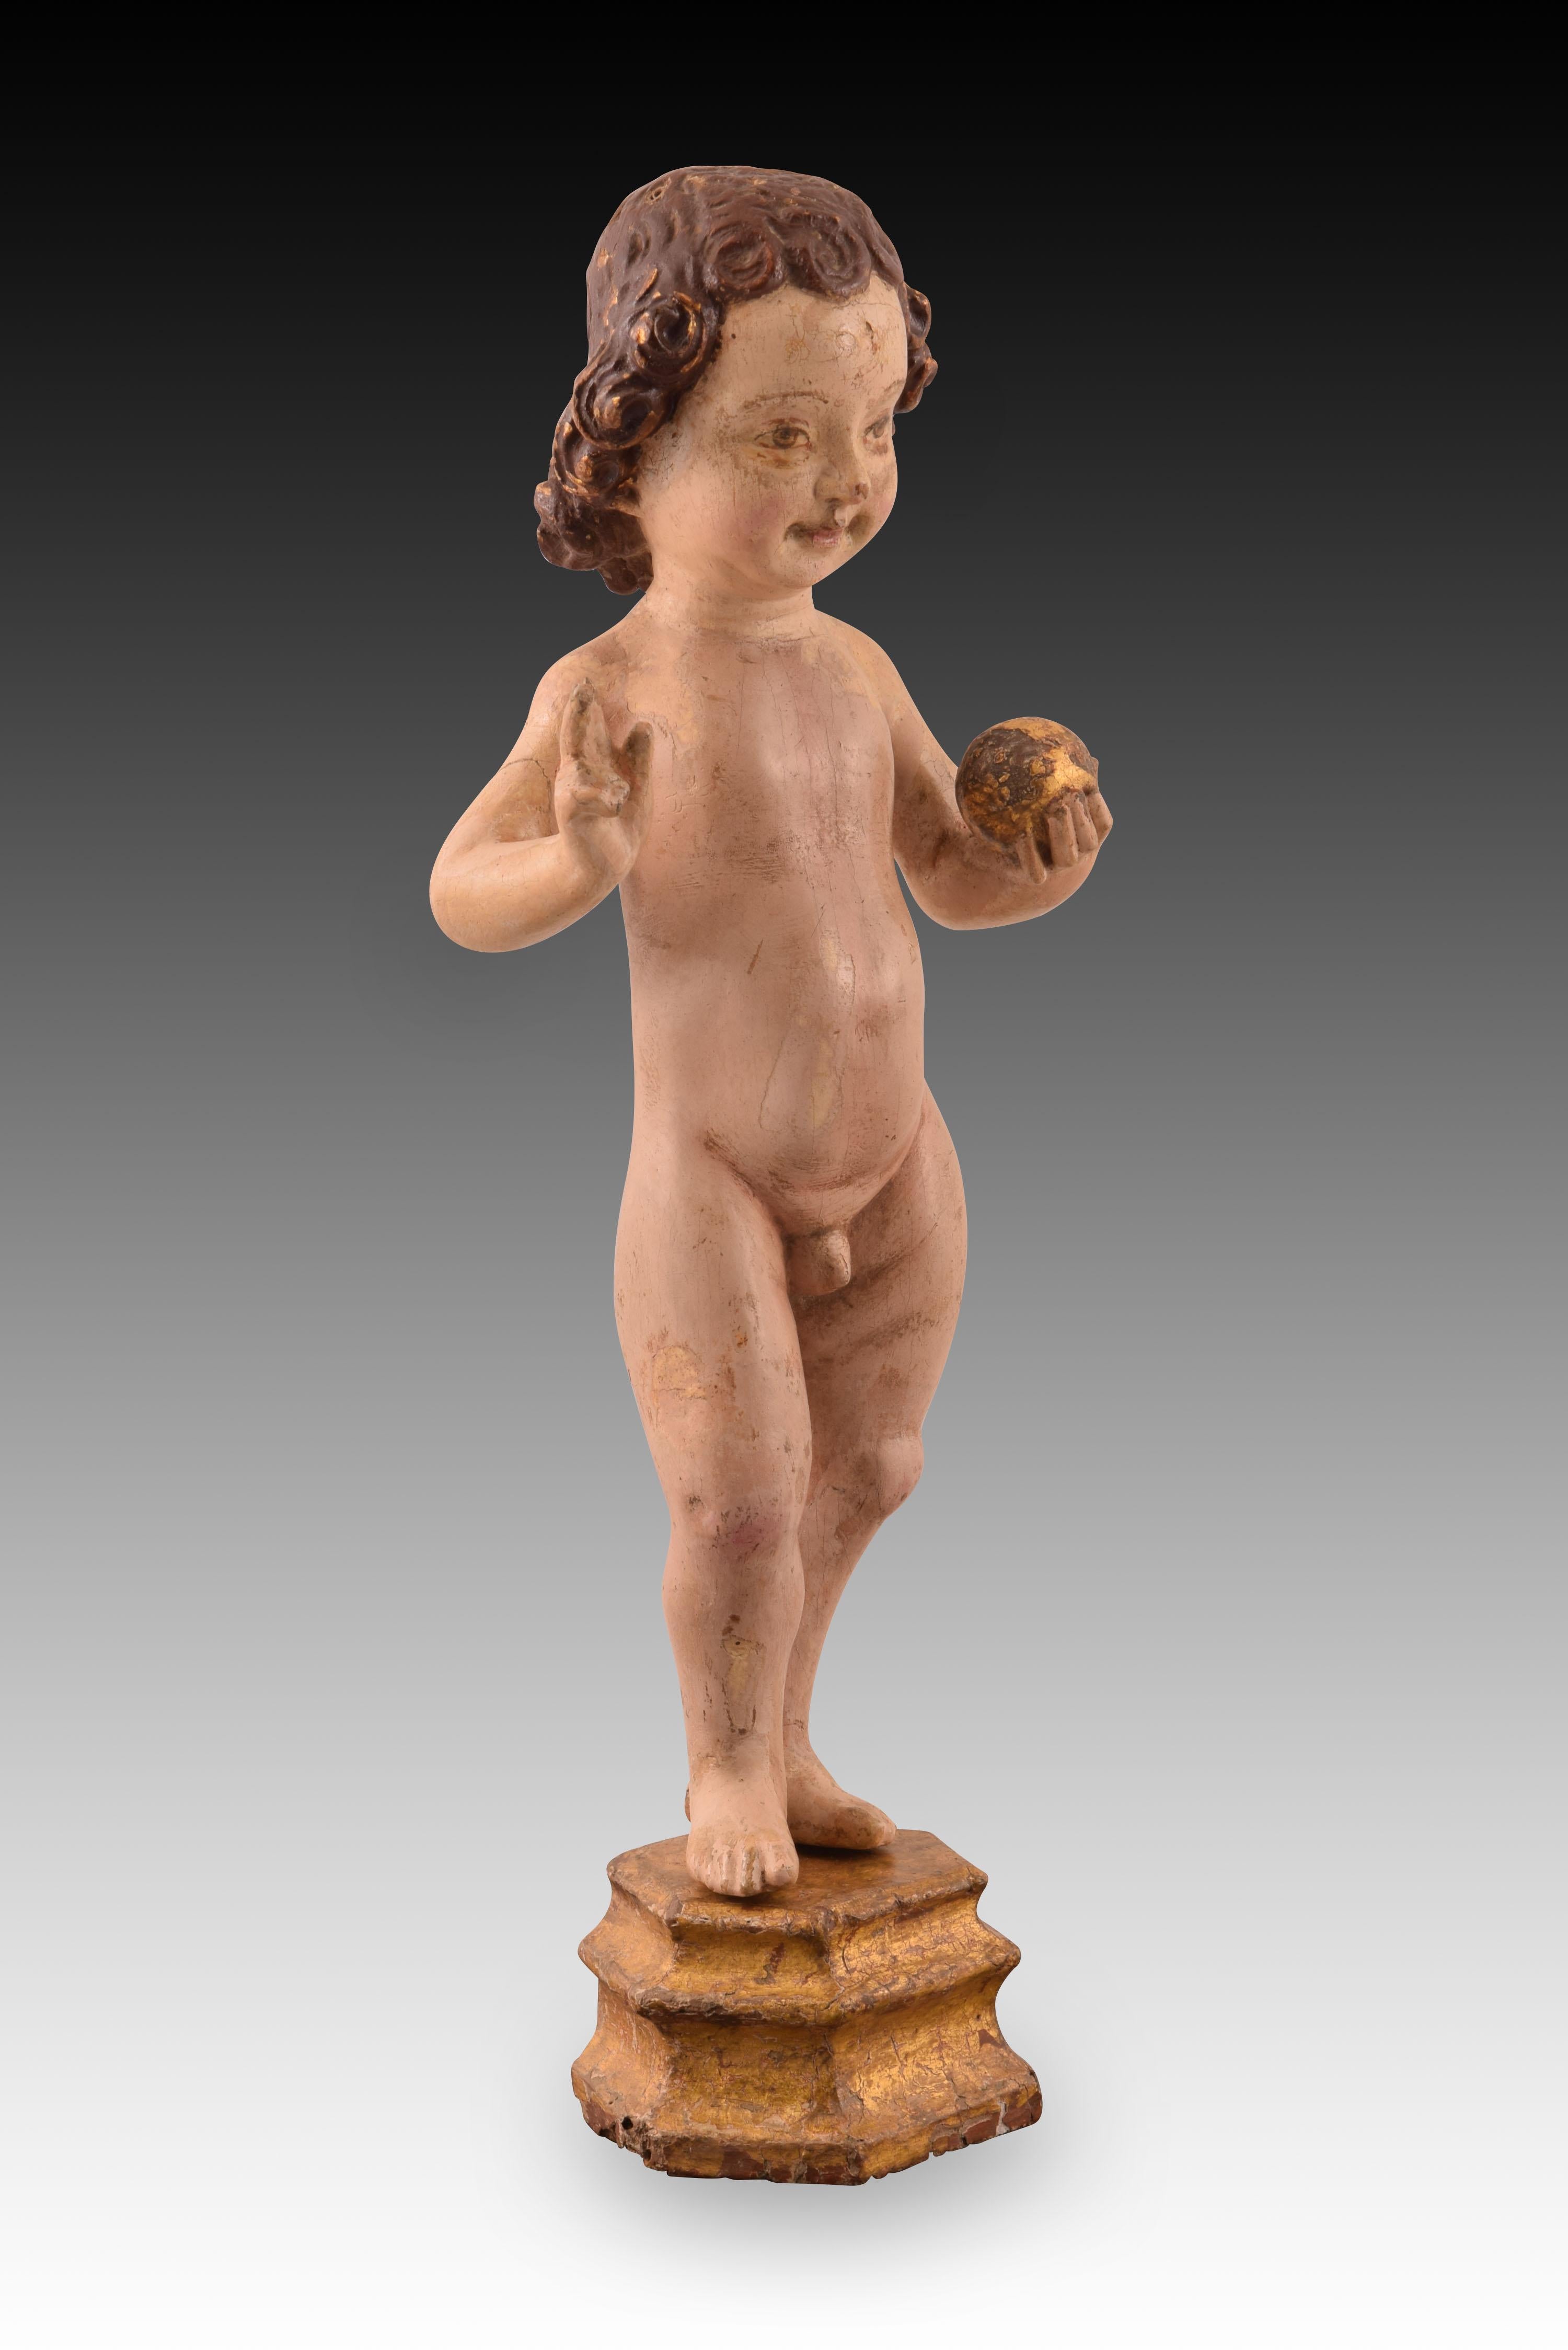 Child Jesus. Carved and polychrome wood. Flemish school, towards the first half of the 16th century. 
Baby Jesus with polygonal base made of carved and polychrome wood. The figure is presented naked, standing, with the right hand raised in a gesture